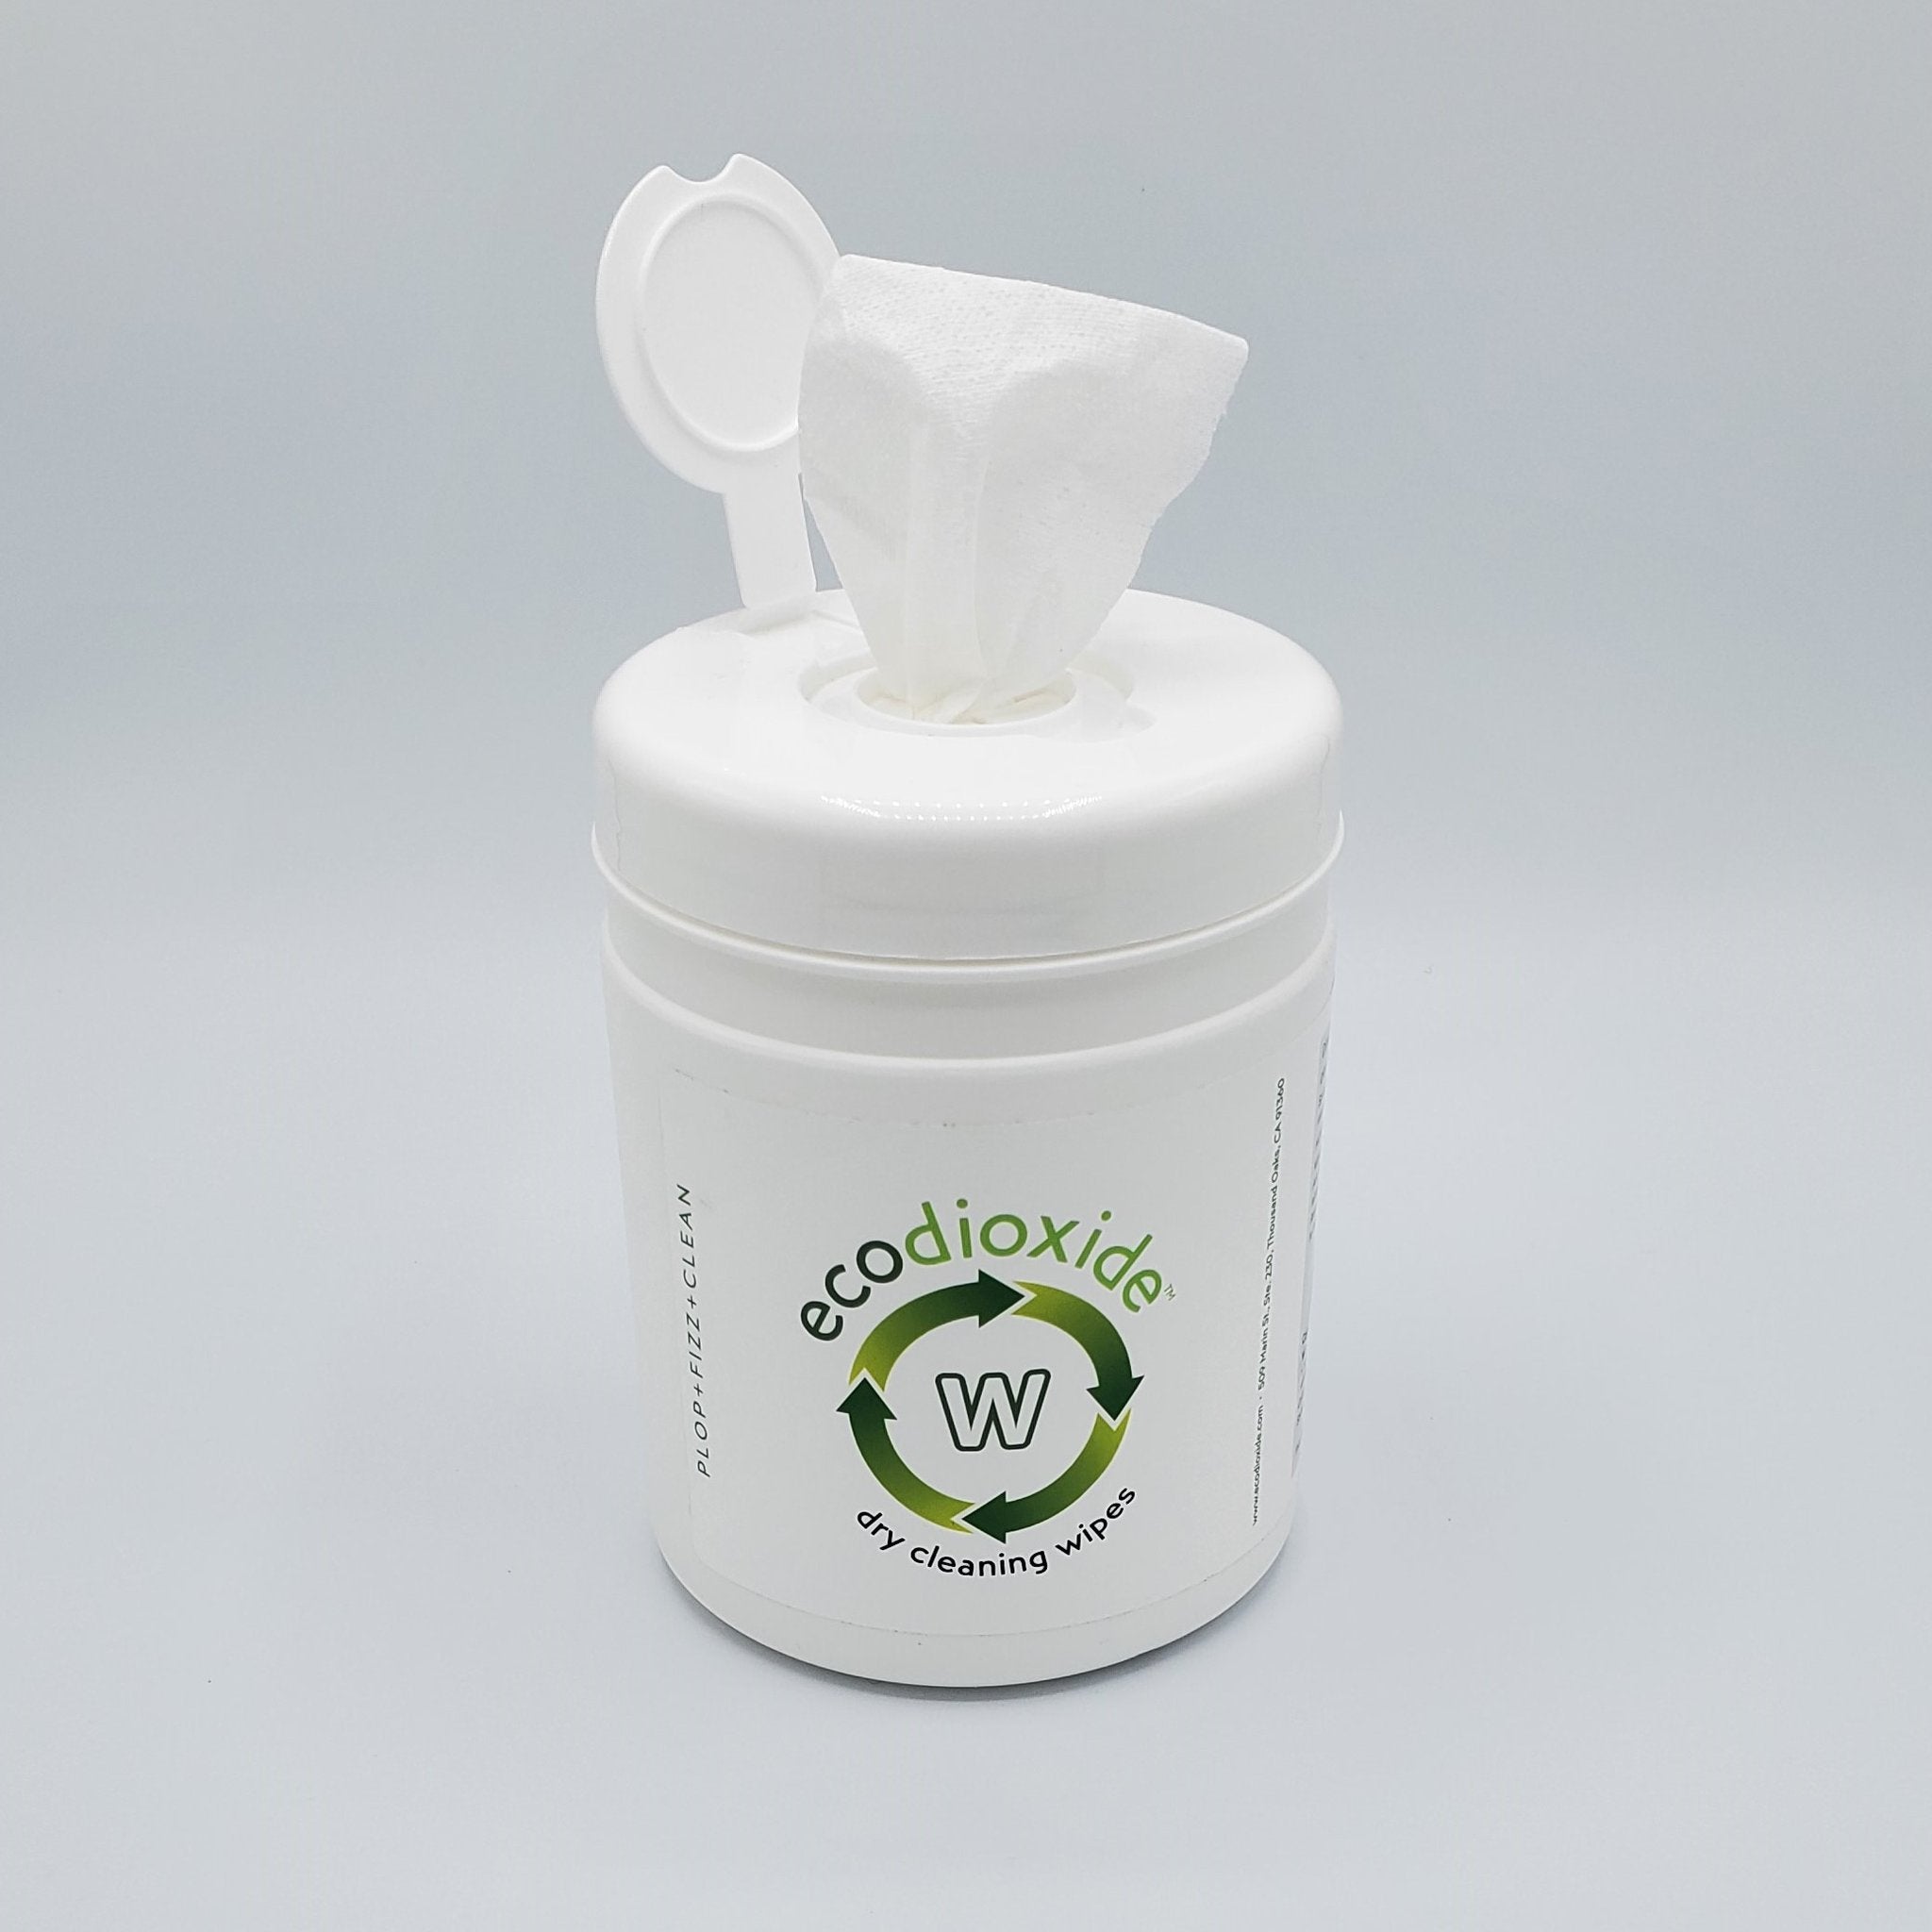 Dry+Wet Cleaning Wipes | Ecodioxide